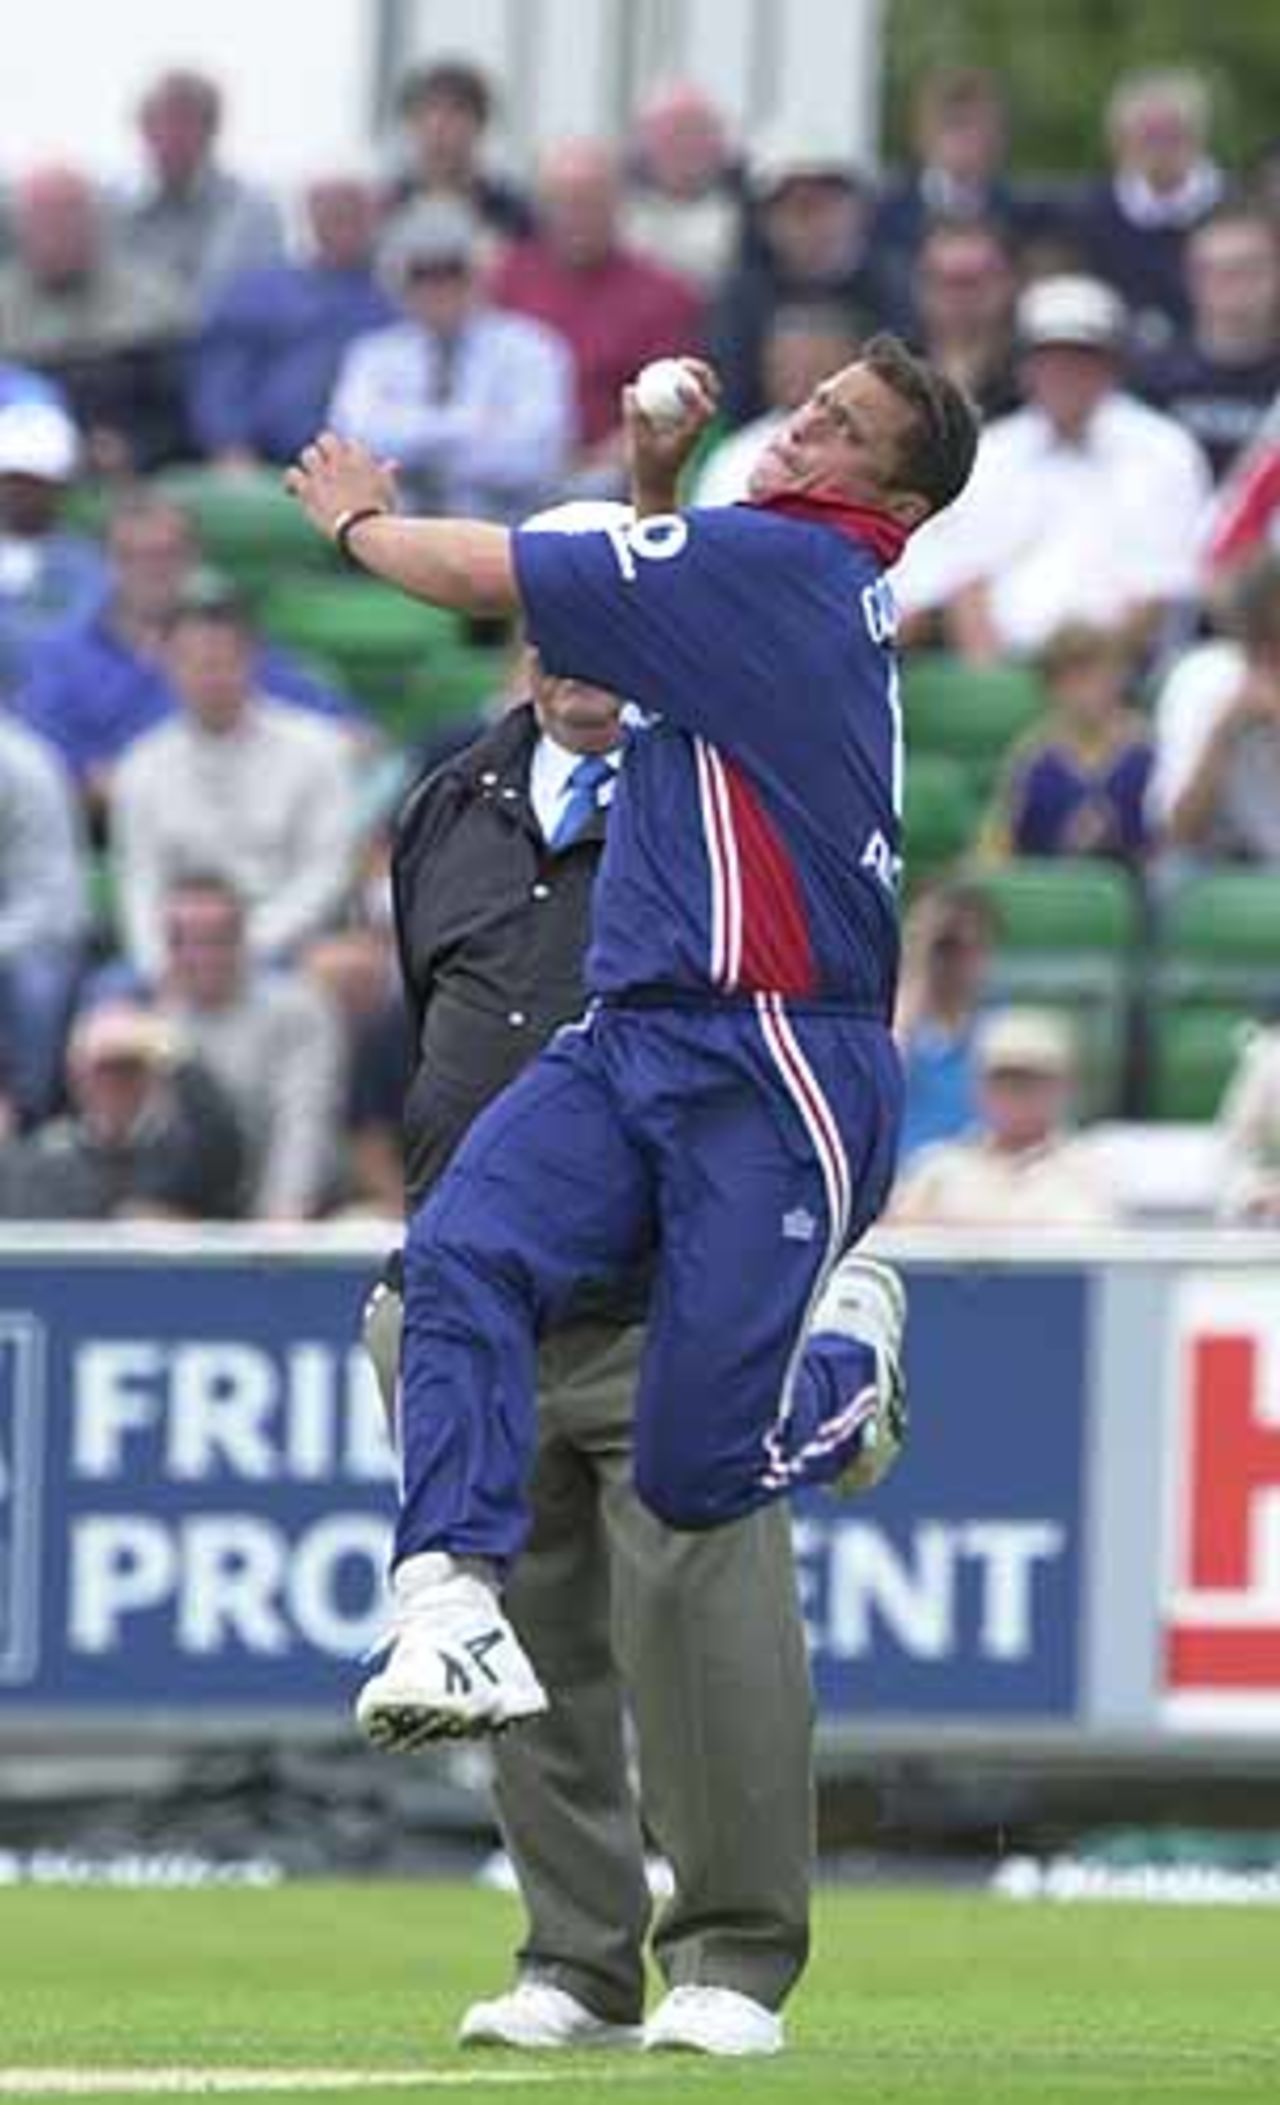 Darren Gough roaring in from the Lumley Castle end, England v India at Chester-le-Street, July 2002